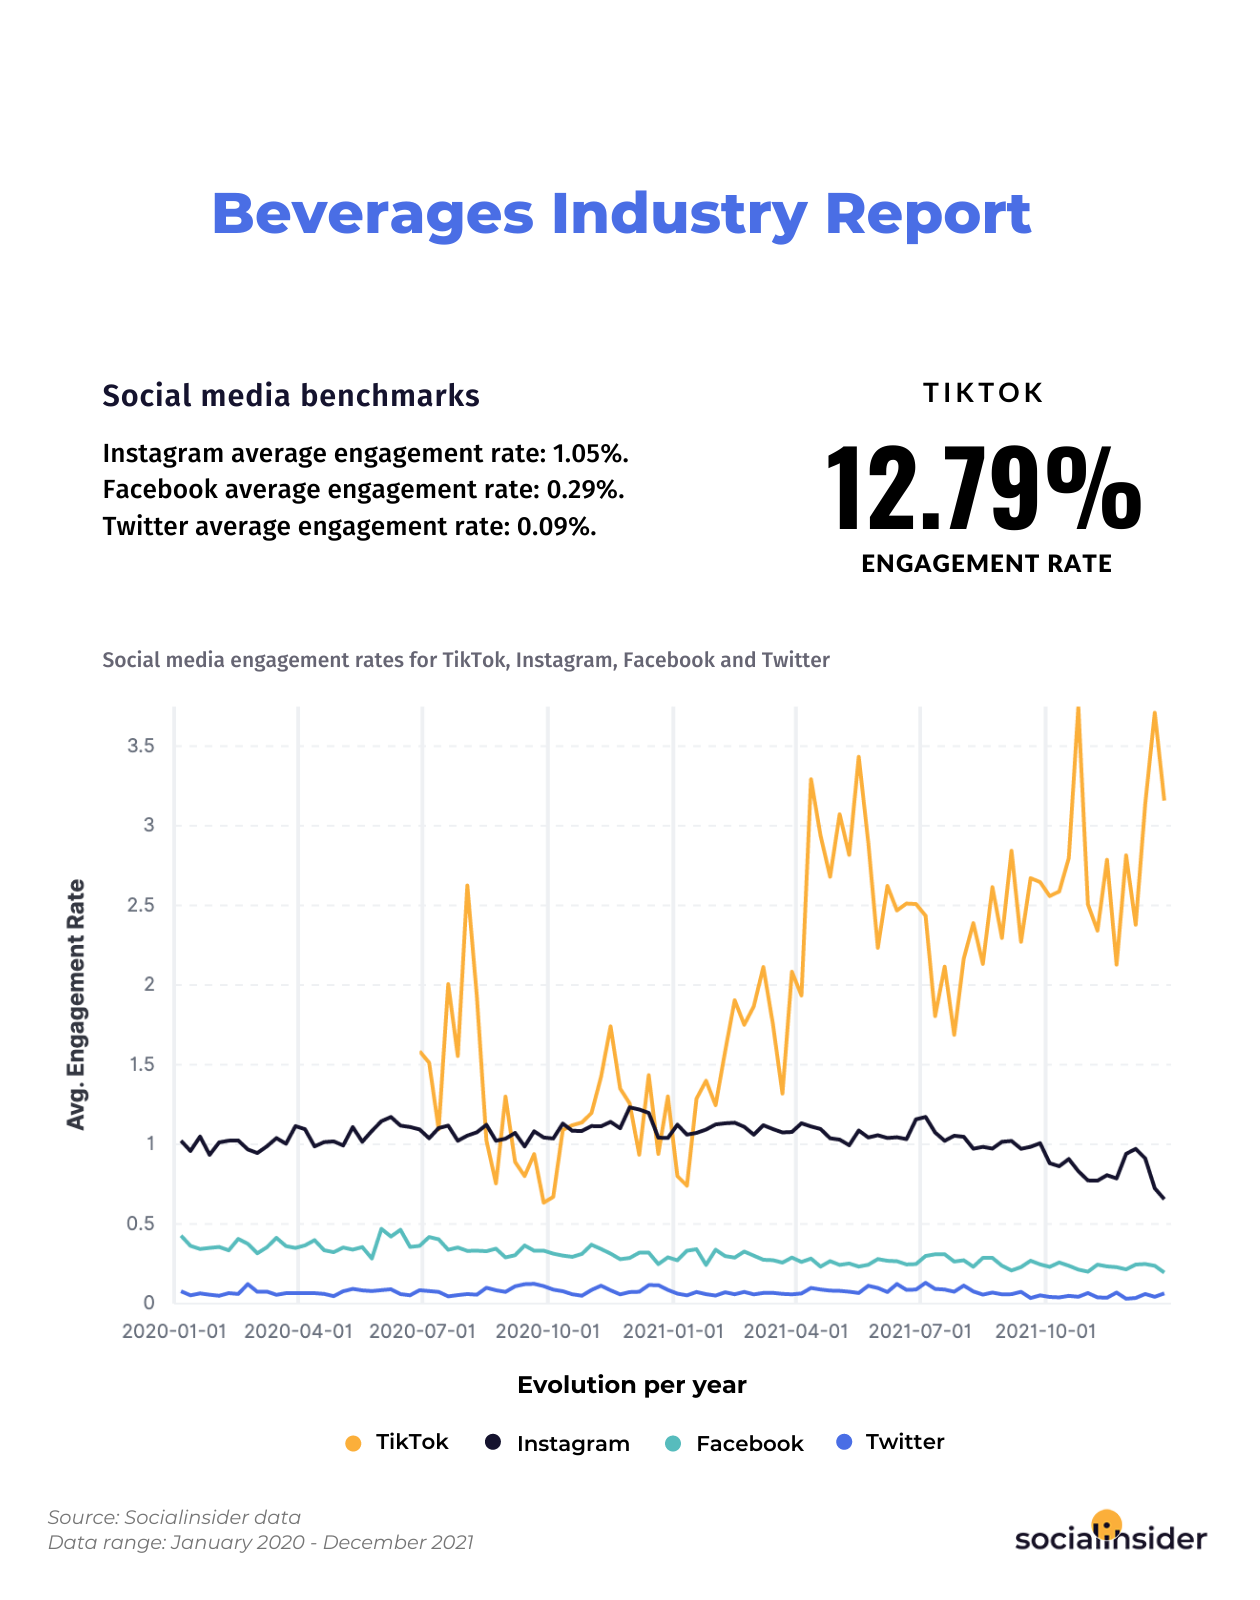 Engagement rates for the beverages industry in 2022